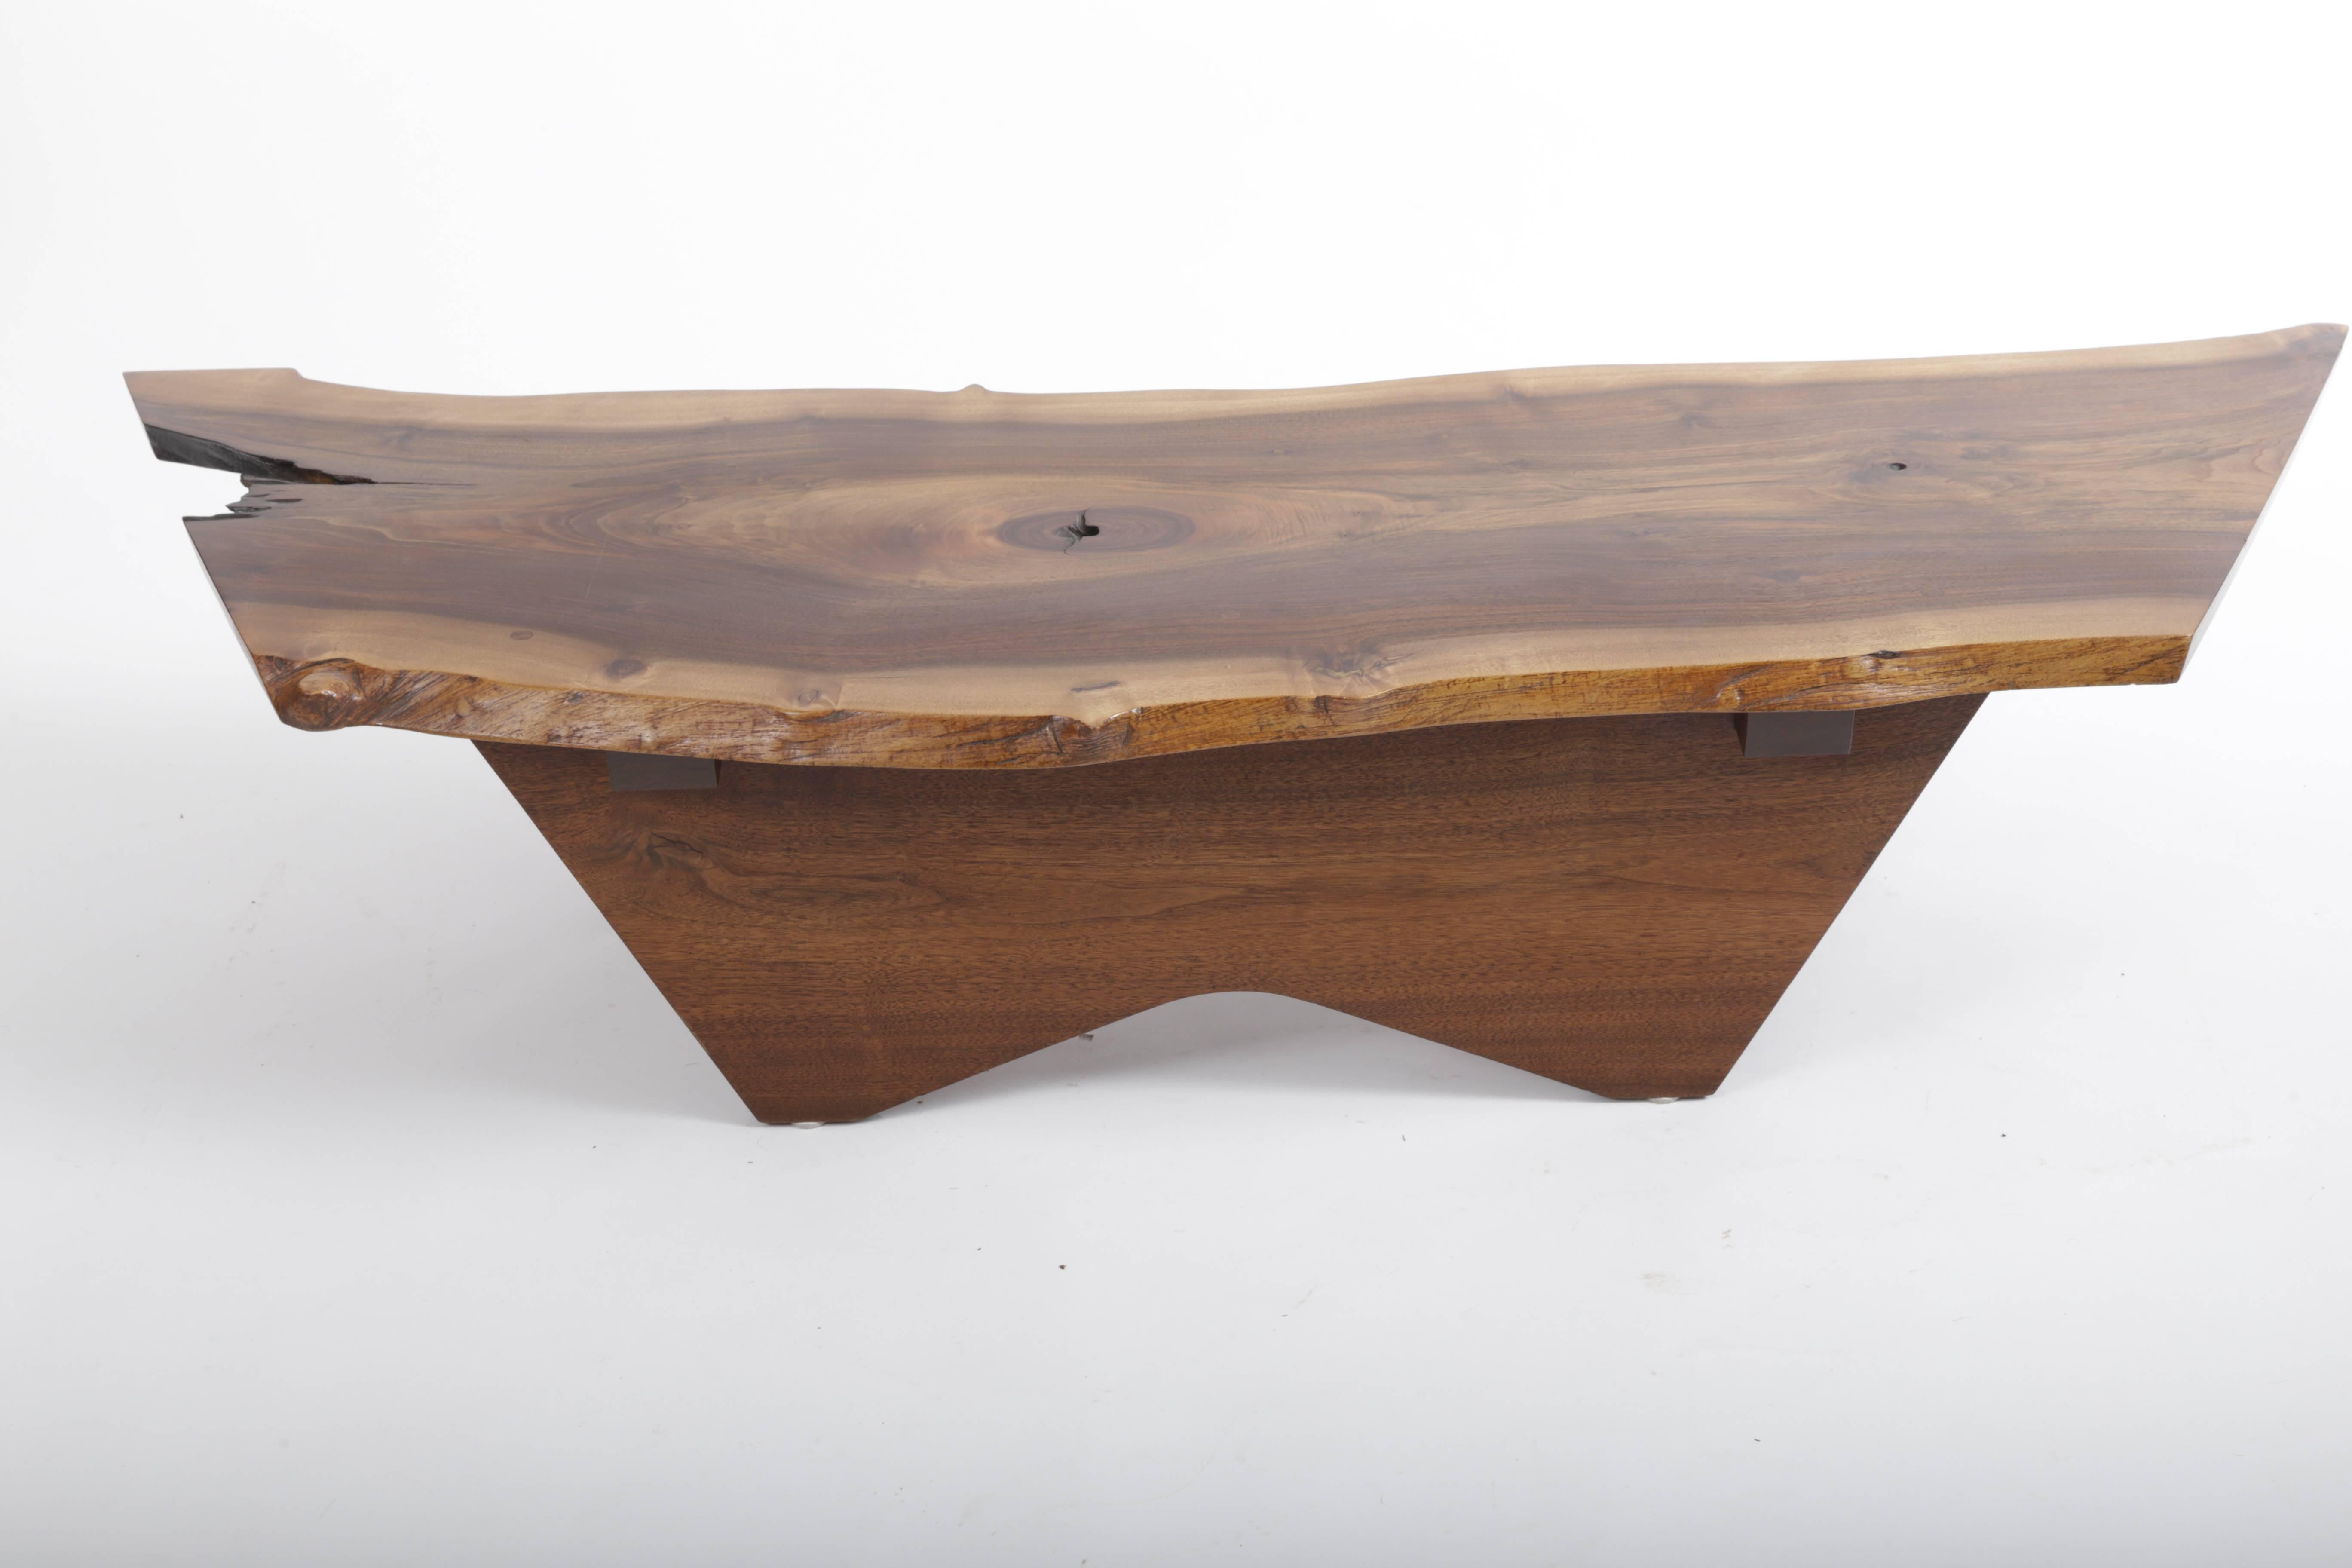 Free edge American black walnut top with very complex graining supported by canted walnut legs and butterfly base.